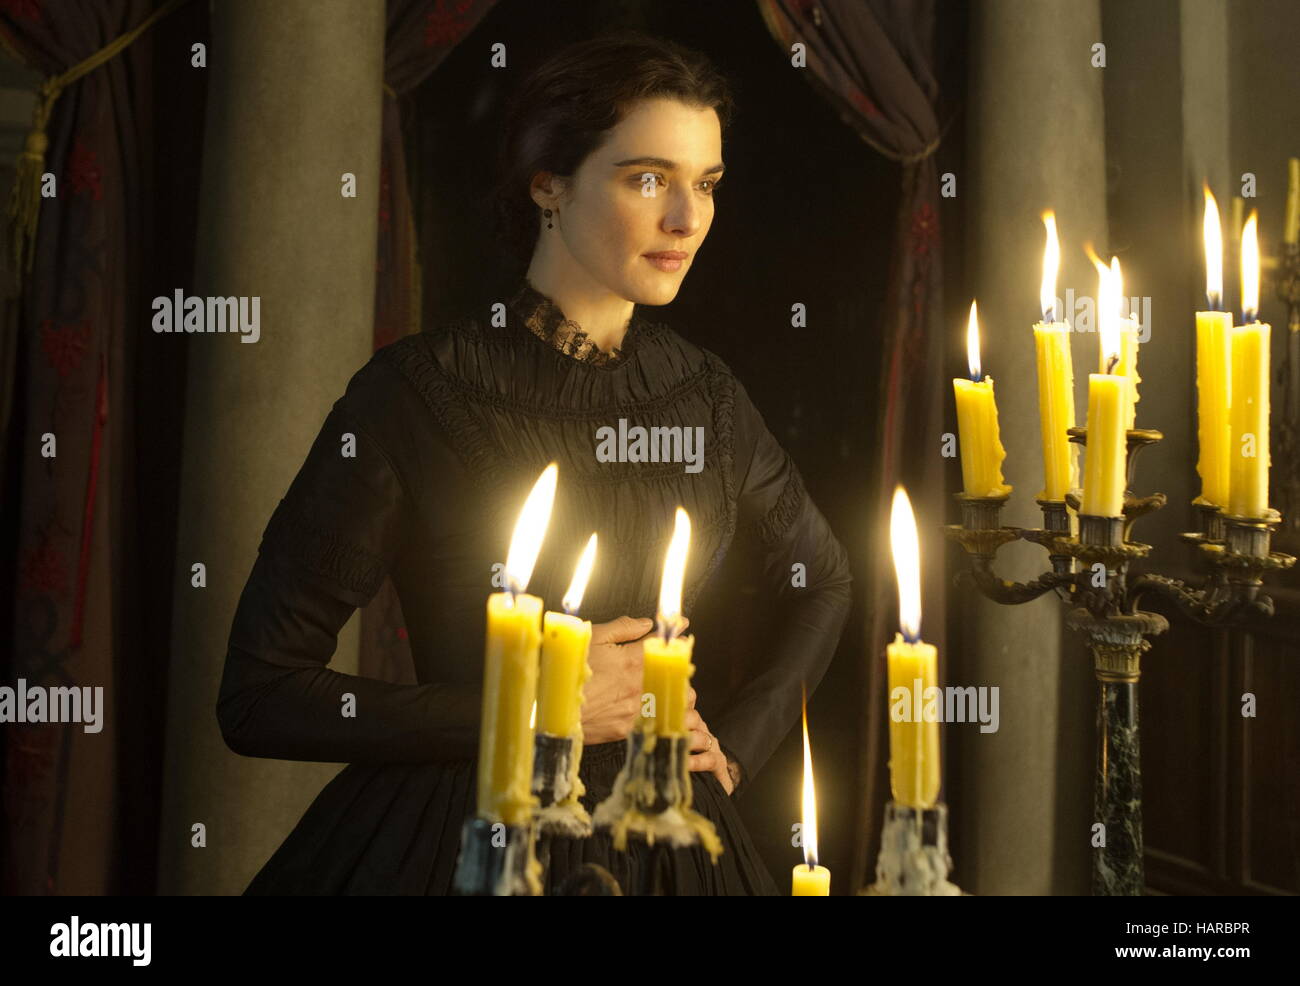 RELEASE DATE: May 5, 2017 TITLE: My Cousin Rachel STUDIO: Fox Searchlight Pictures DIRECTOR: Roger Michell PLOT: A young Englishman plots revenge against his mysterious, beautiful cousin, believing that she murdered his guardian. But his feelings become complicated as he finds himself falling under the beguiling spell of her charms STARRING: Rachel Weisz as Rachel Ashley (Credit: c Fox Searchlight Pictures/Entertainment Pictures/) Stock Photo